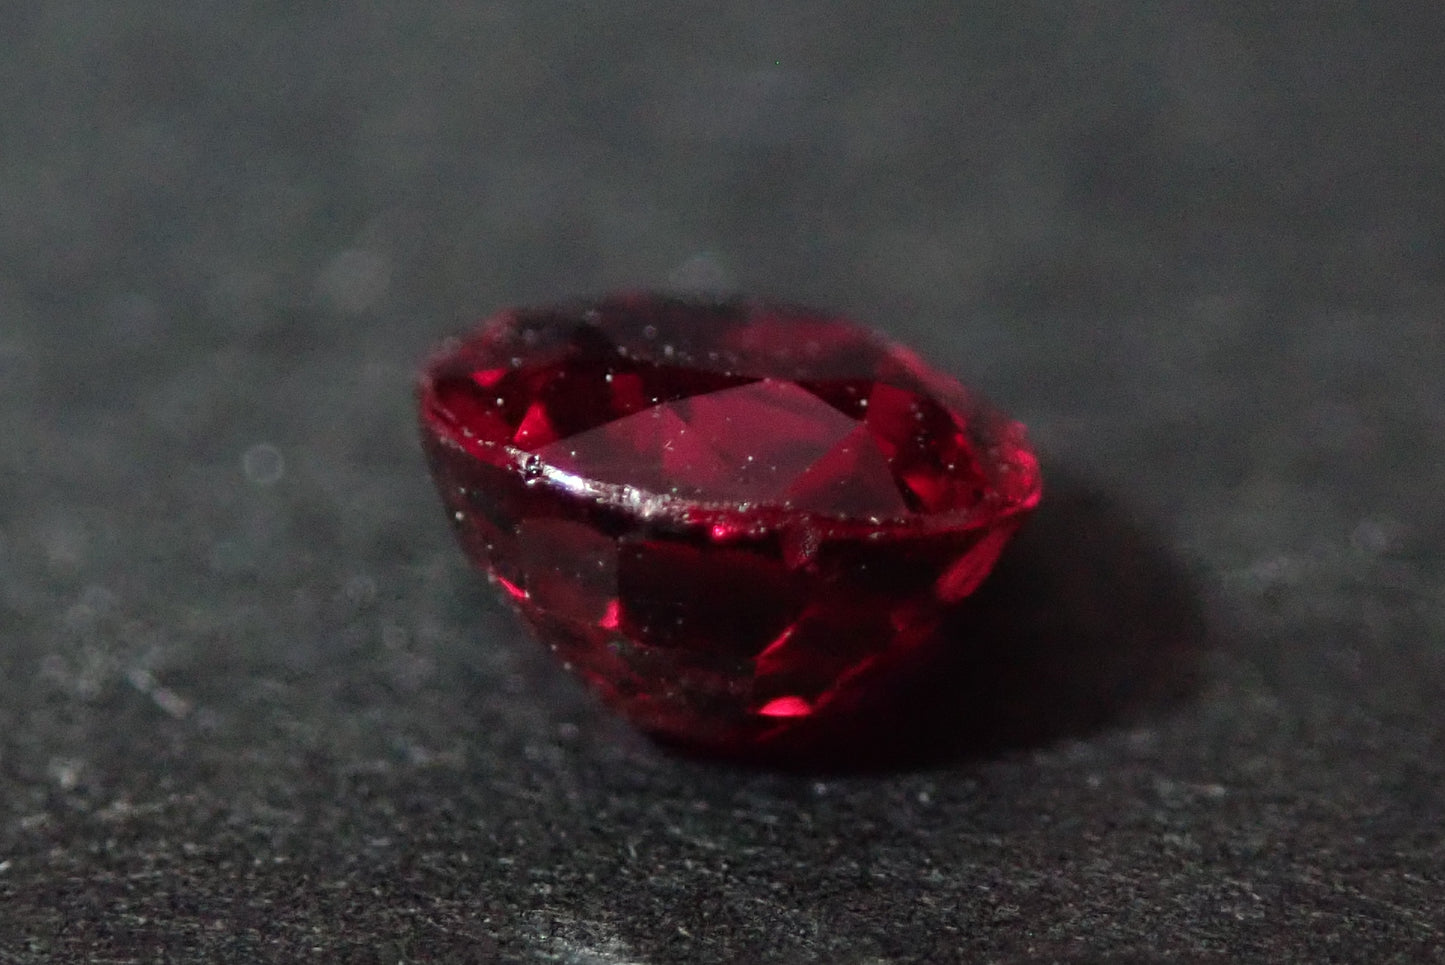 Ruby 0.436ct